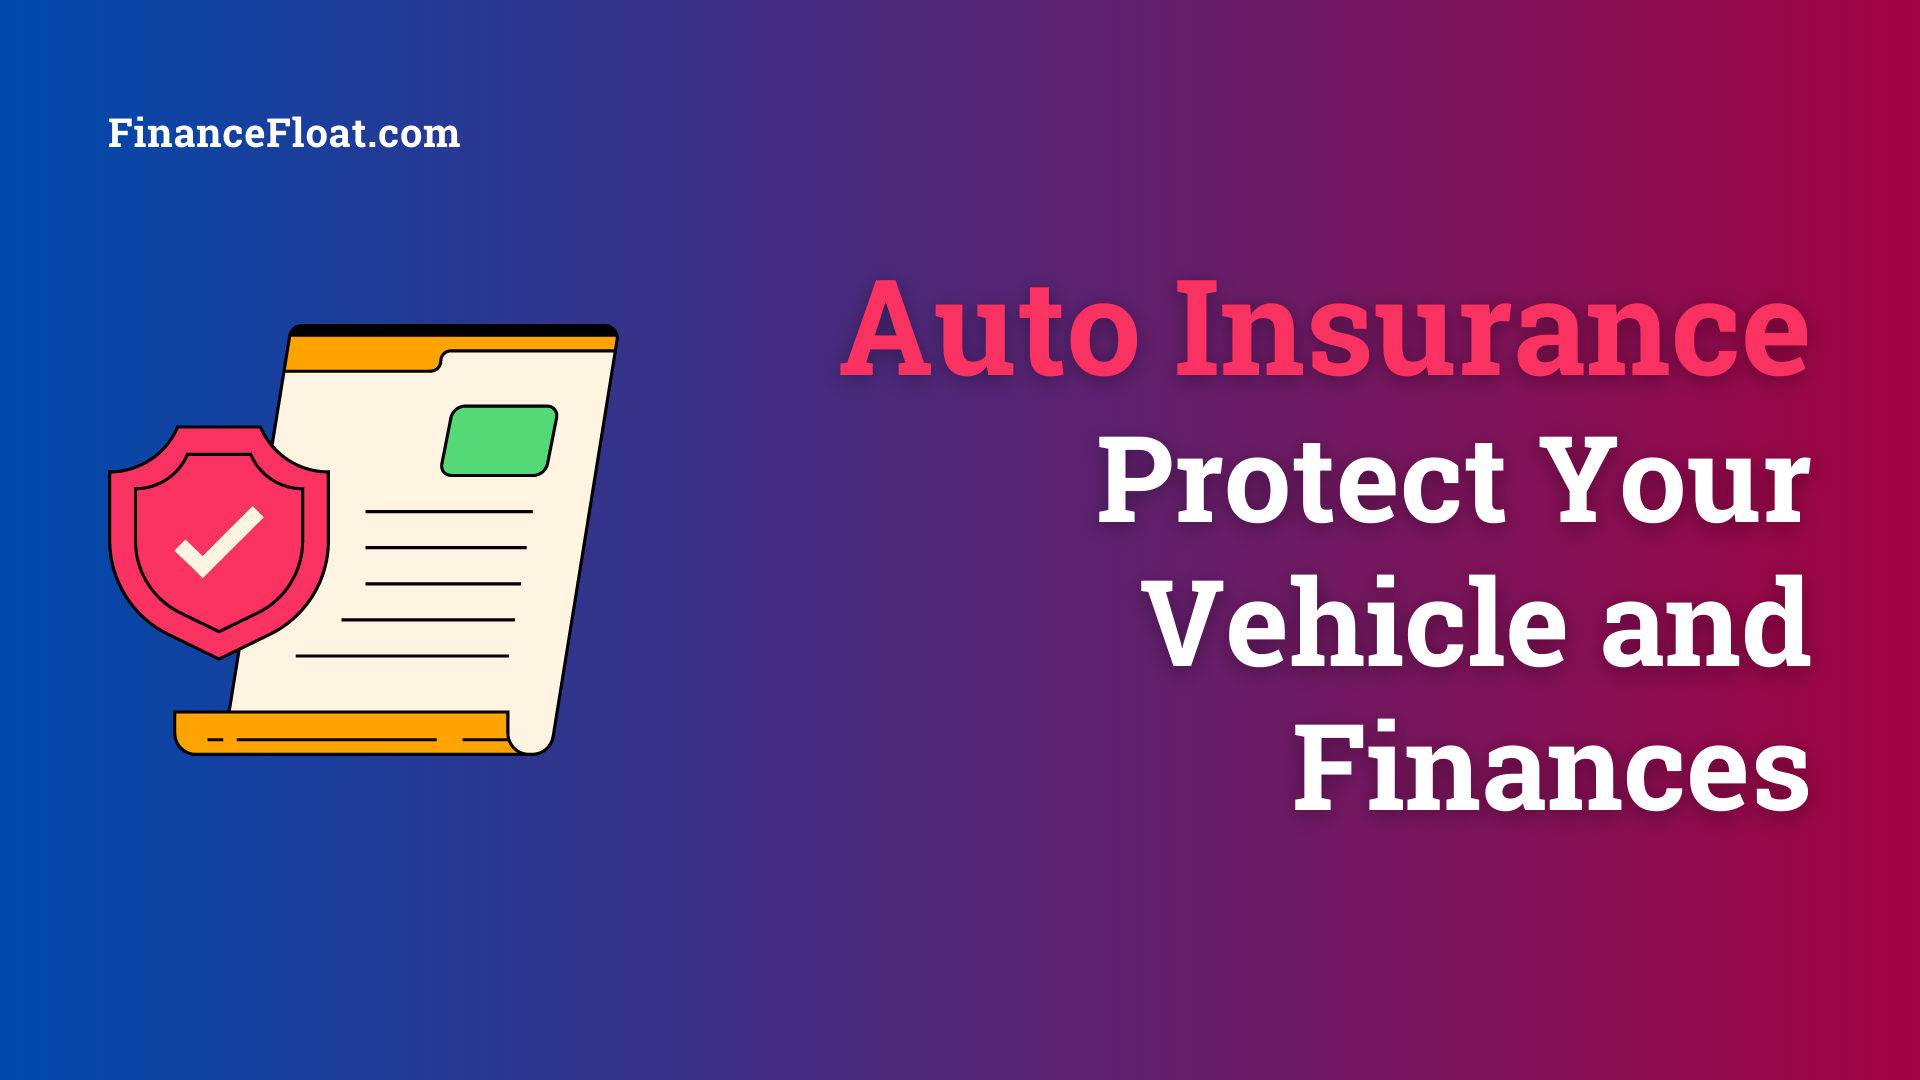 Auto Insurance Protect Your Vehicle and Finances